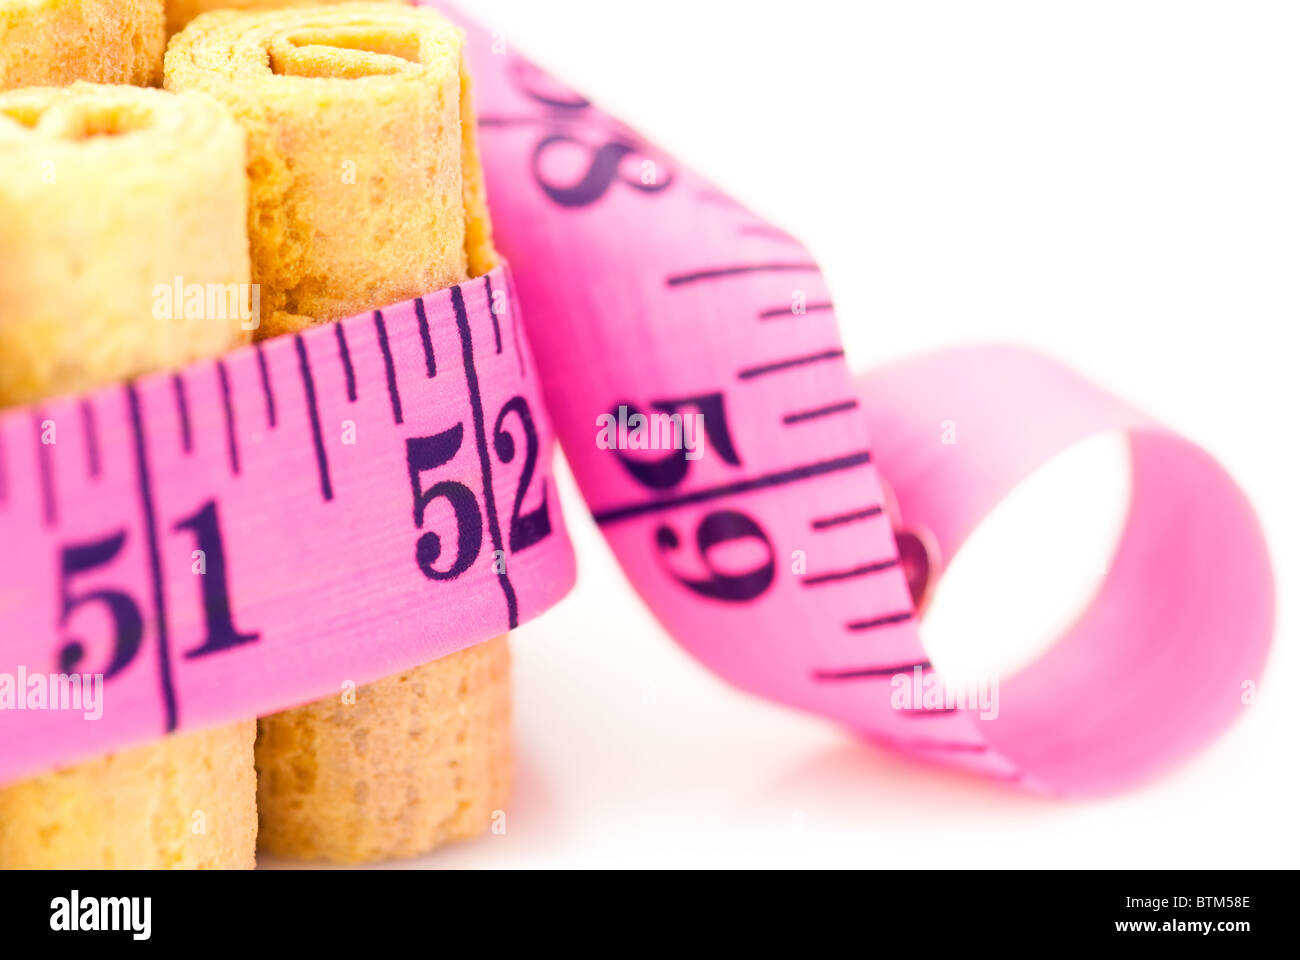 Unhealthy eating concept: Cakes rounded inch scale measuring tape. Shallow depth of field Stock Photo